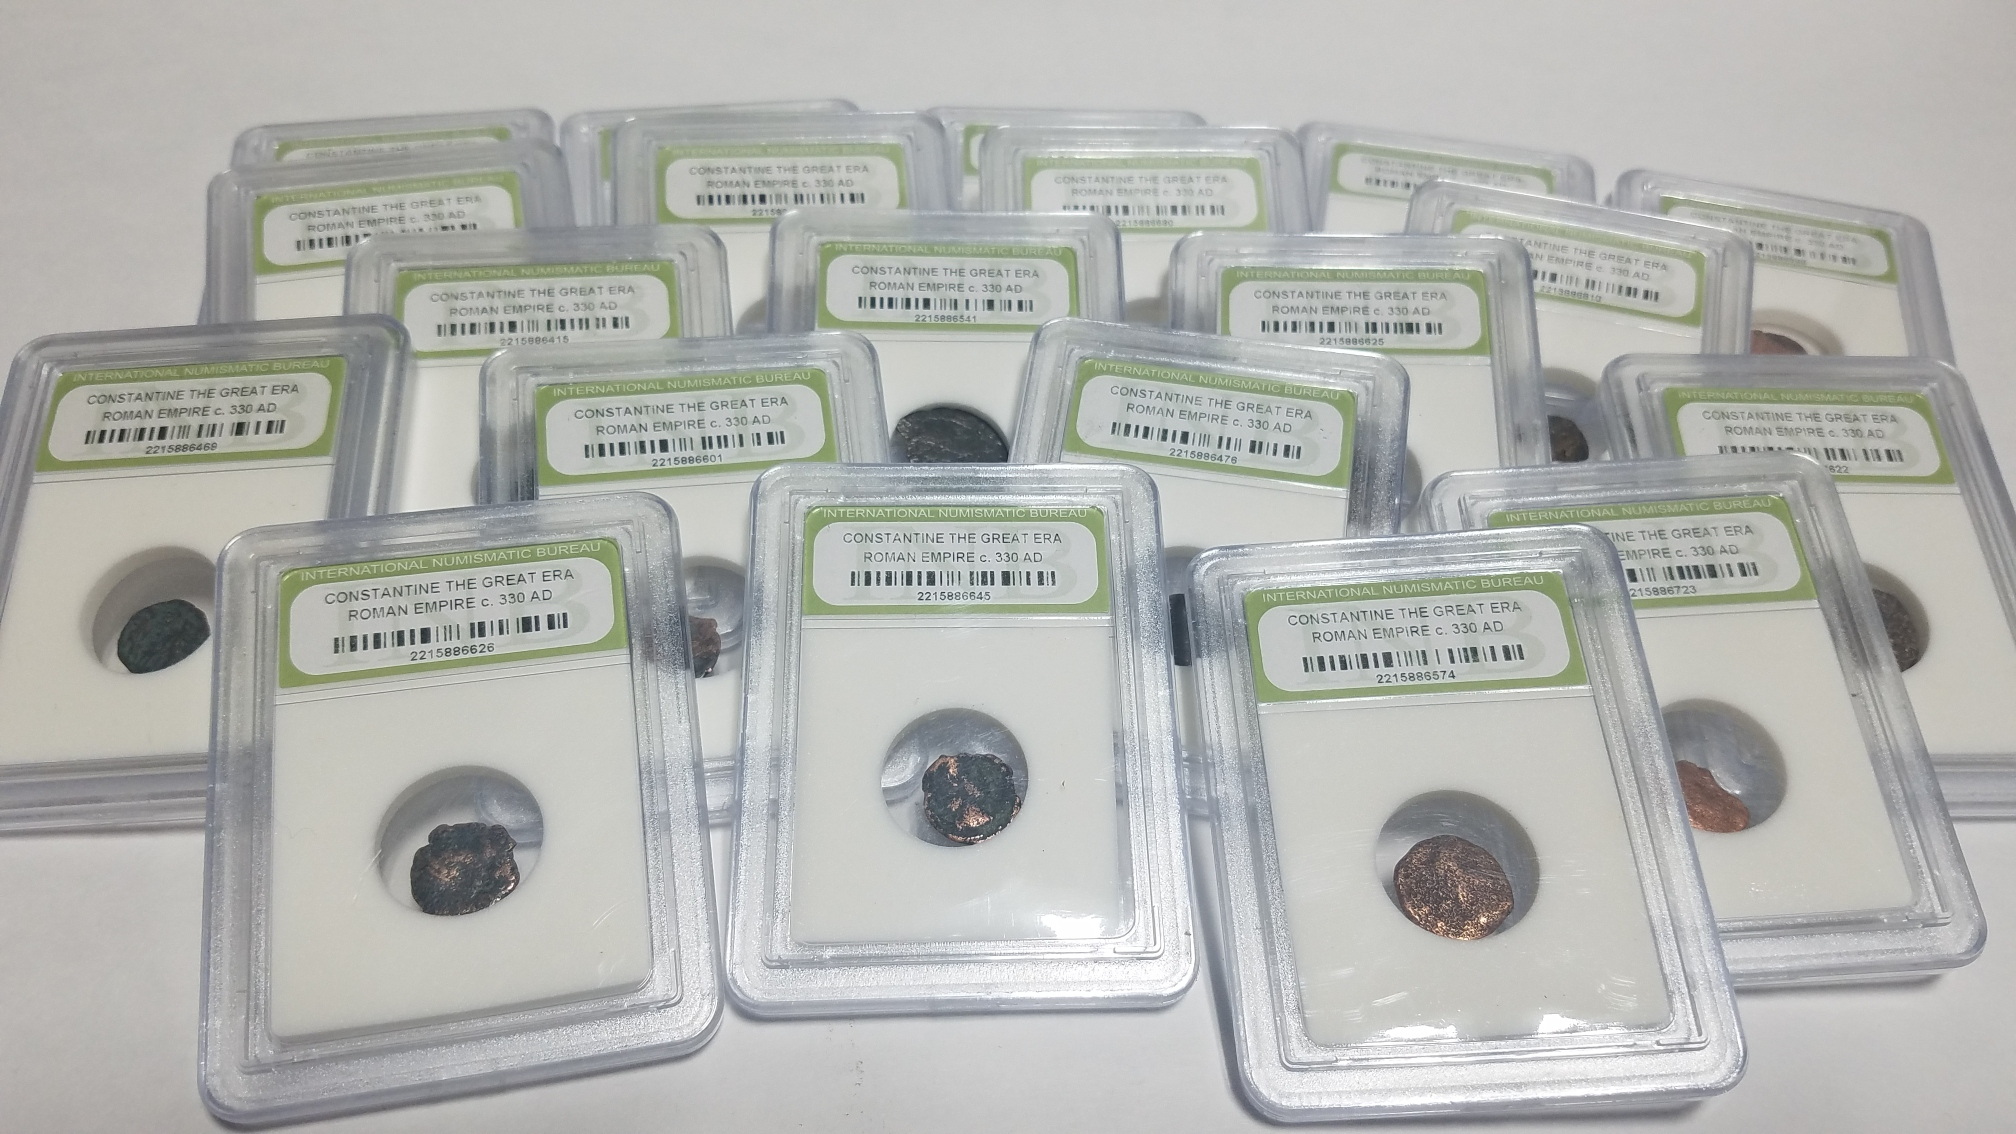 OLD COIN GENUINE AUTHENTIC IDENTIFIED ROMAN COINS GRADED IN GRADED CASE RANDOM COIN IN GRADED CASE